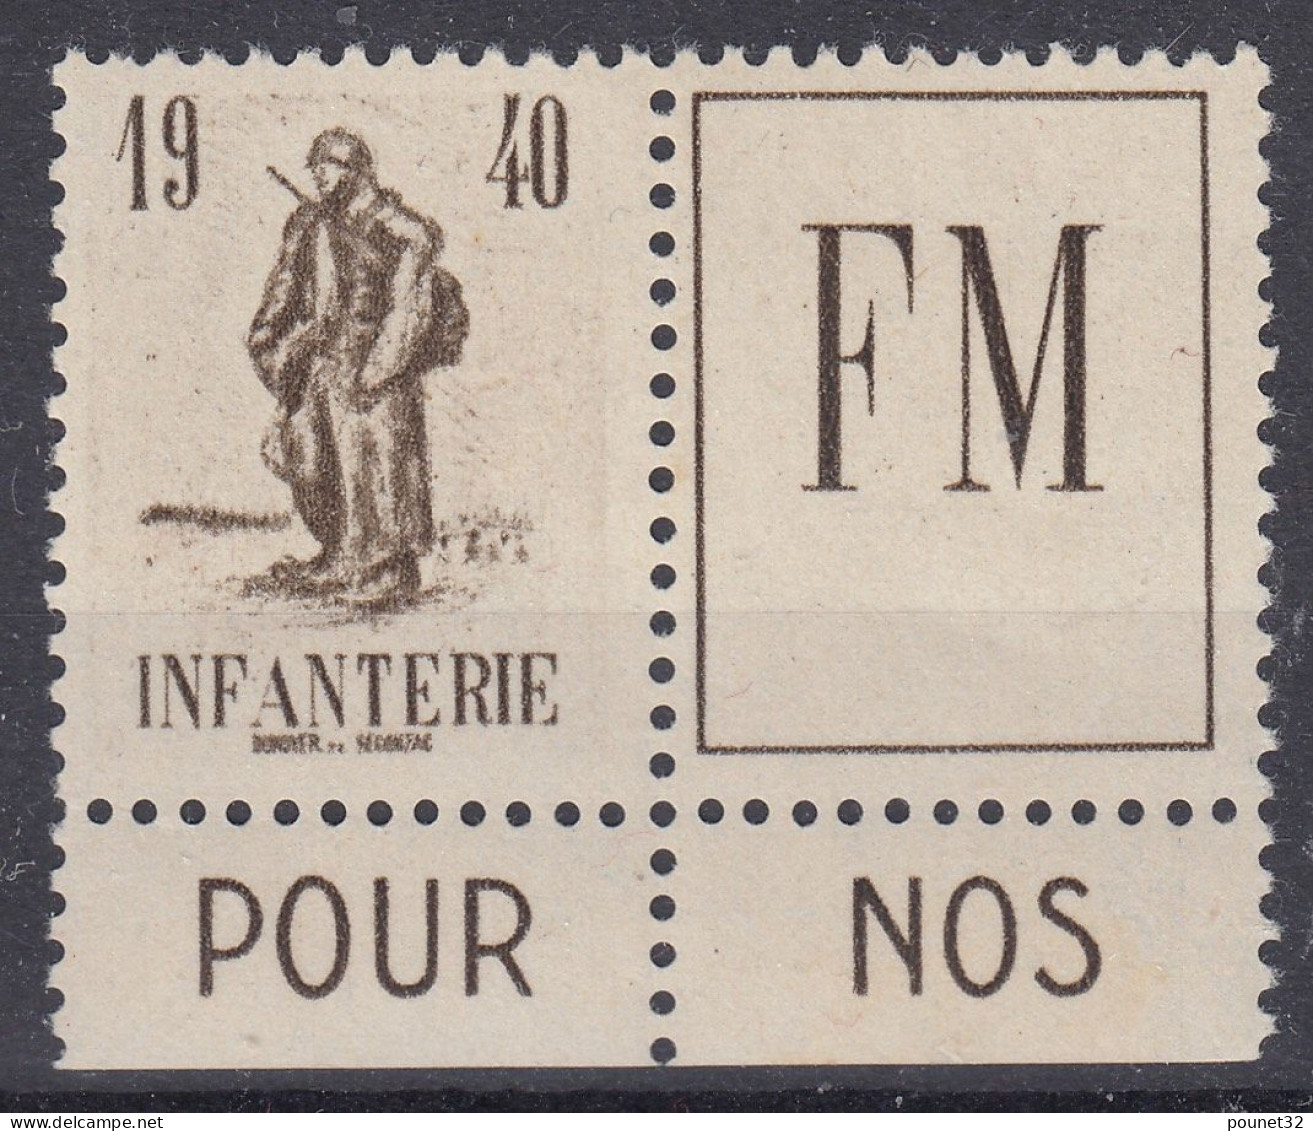 TIMBRE FRANCE INFANTERIE FM TENANT A VIGNETTE N° 10A NEUF GOMME SANS CHARNIERE - Military Postage Stamps